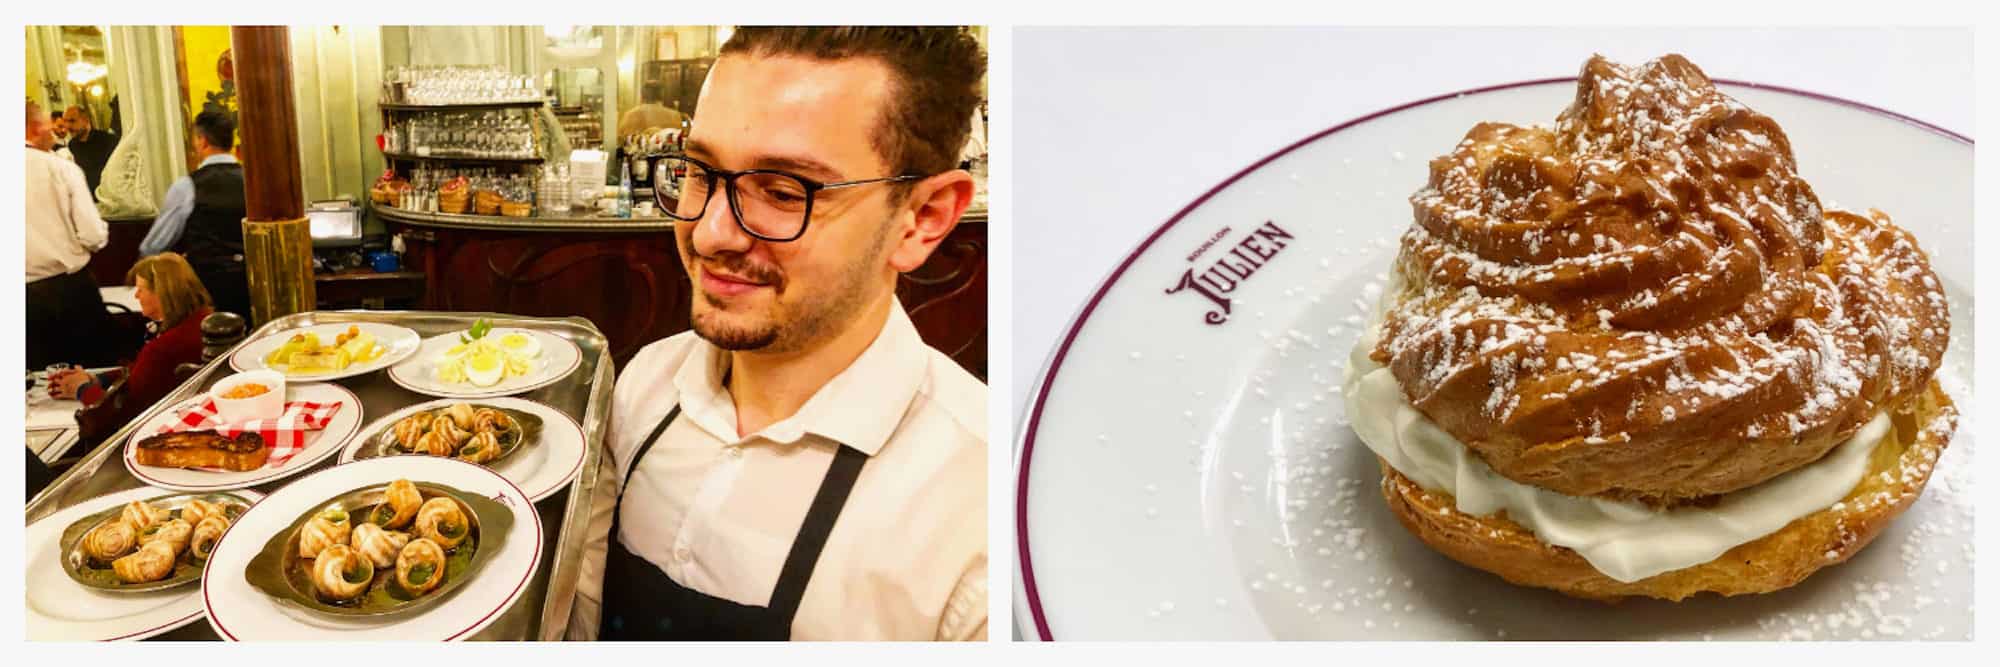 A waitor bringing out snails on a tray (left) and chantilly cream dessert (right) at Bouillon Julien restaurant in Paris